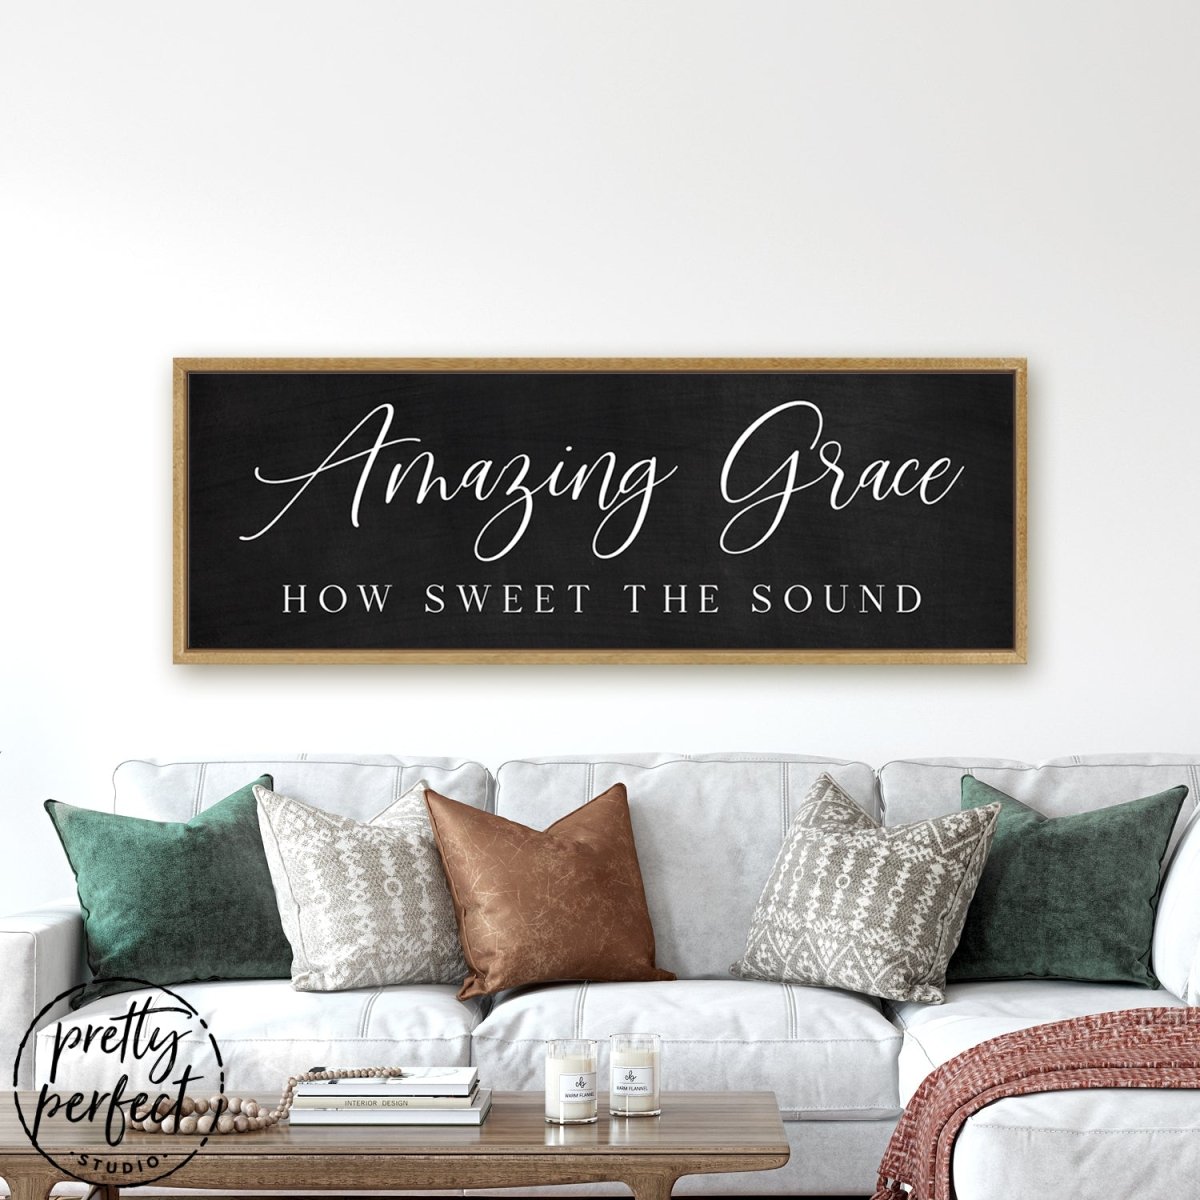 Amazing Grace, How Sweet The Sound Christian Wall Art Above Couch - Pretty Perfect Studio